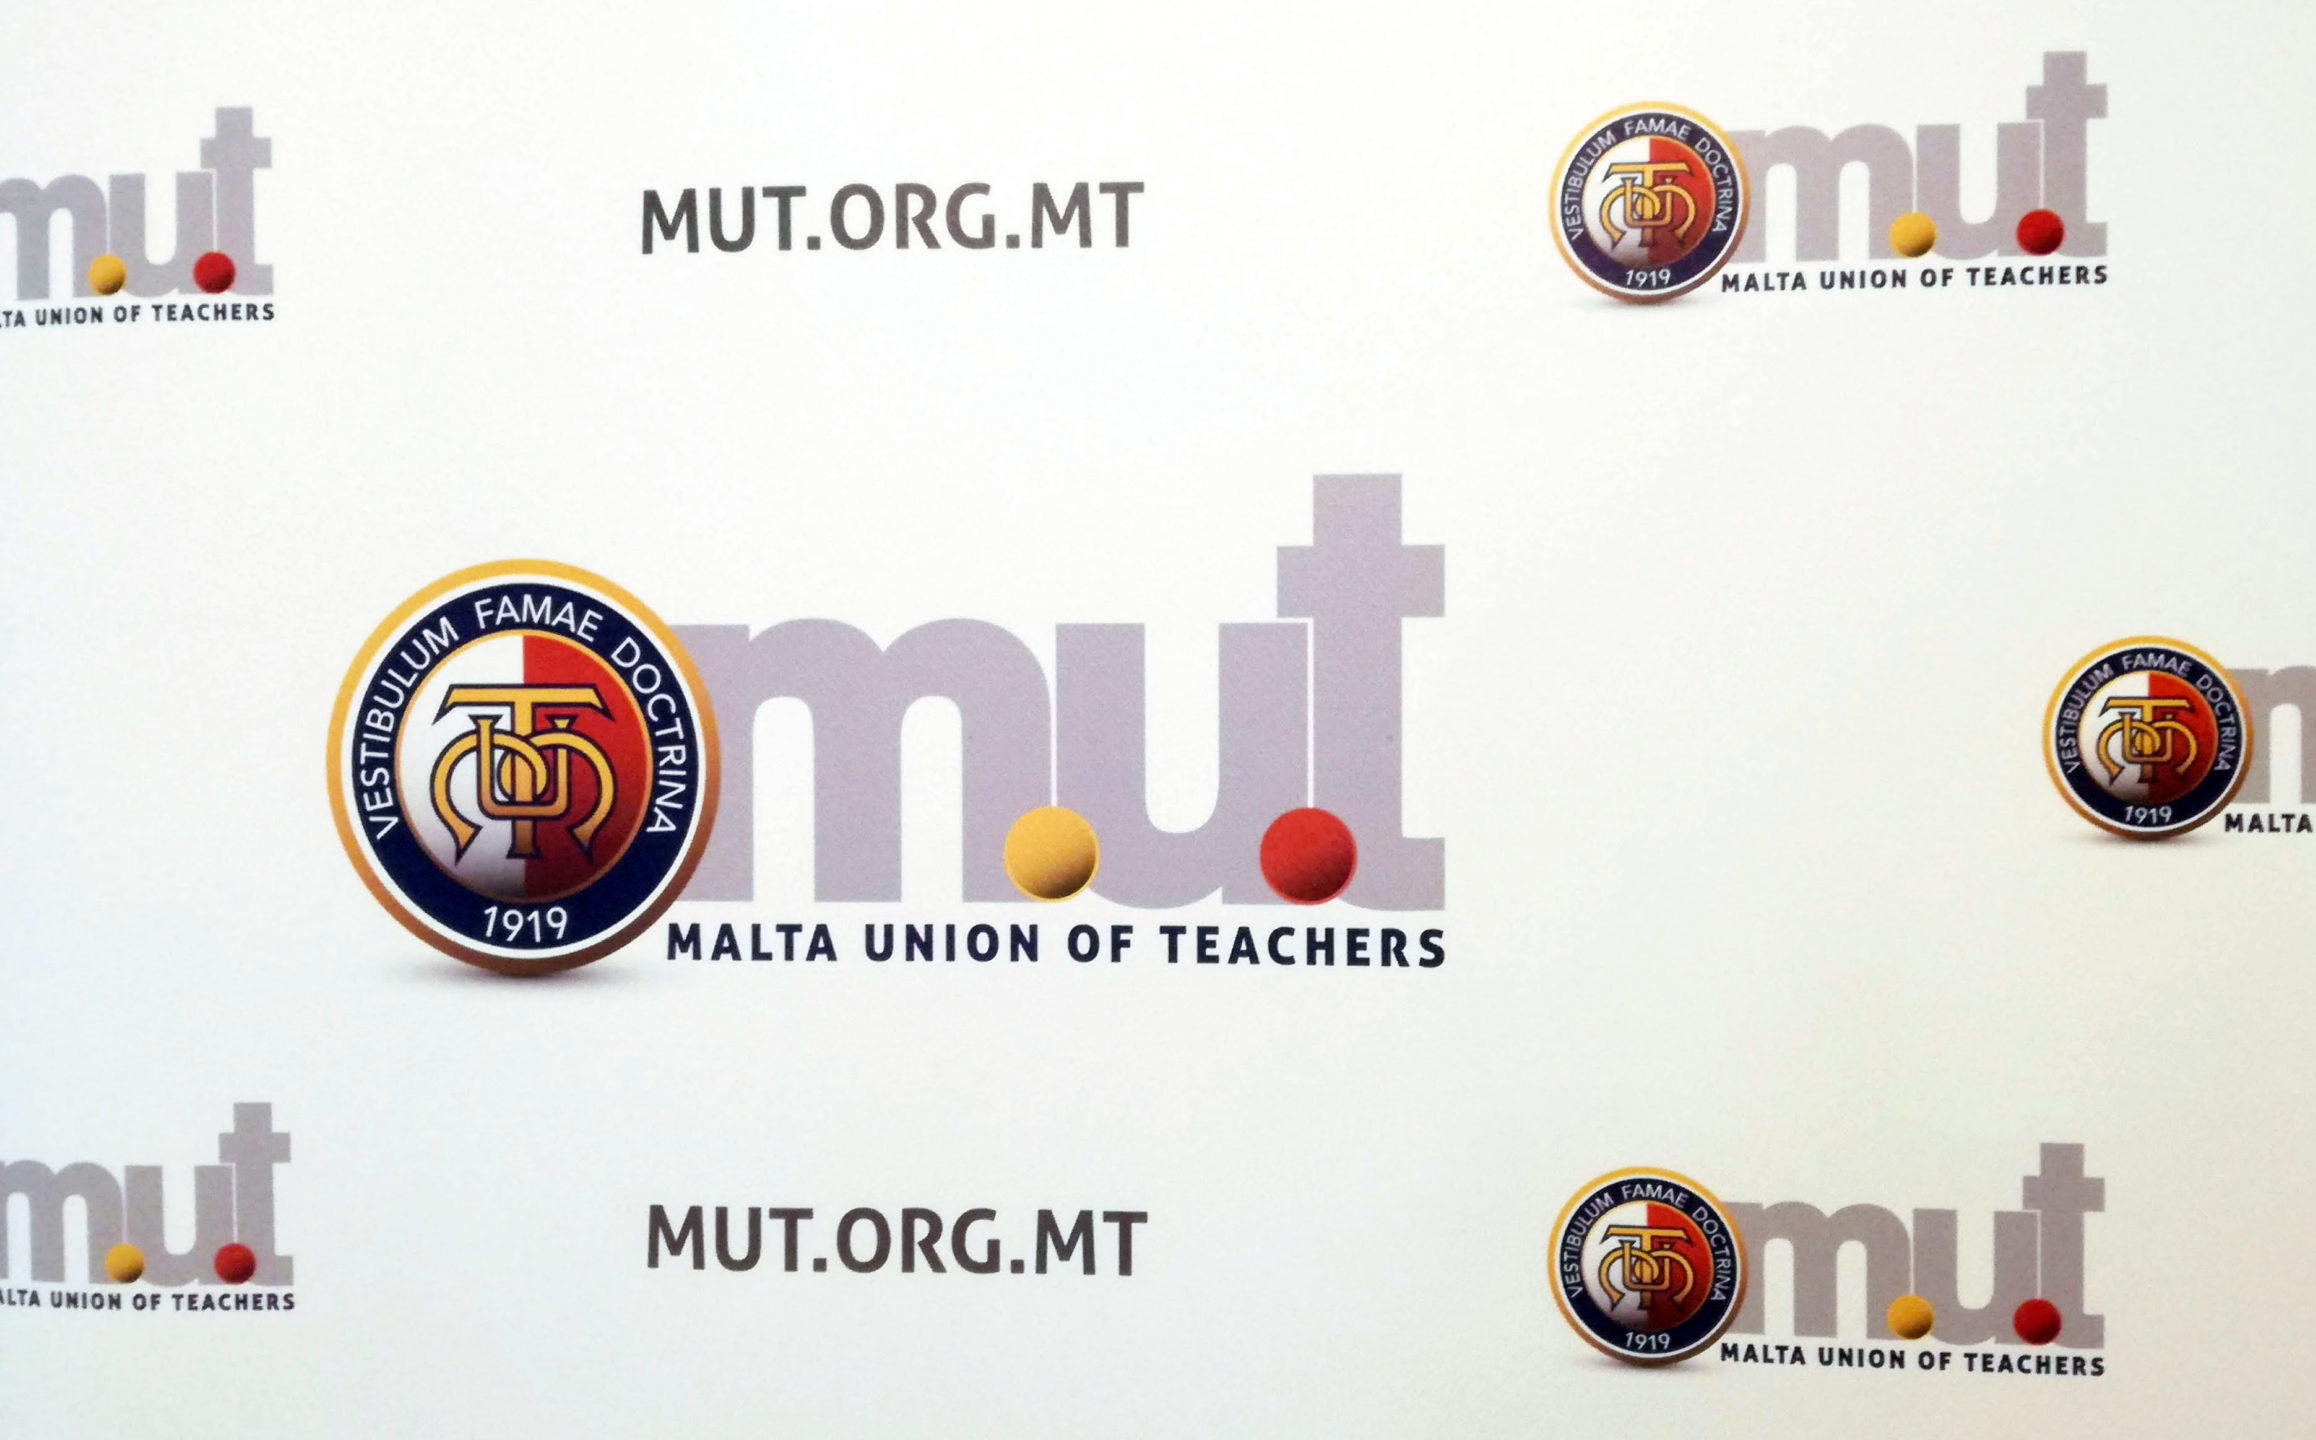 MUT’s position on school hours and calendar unchanged